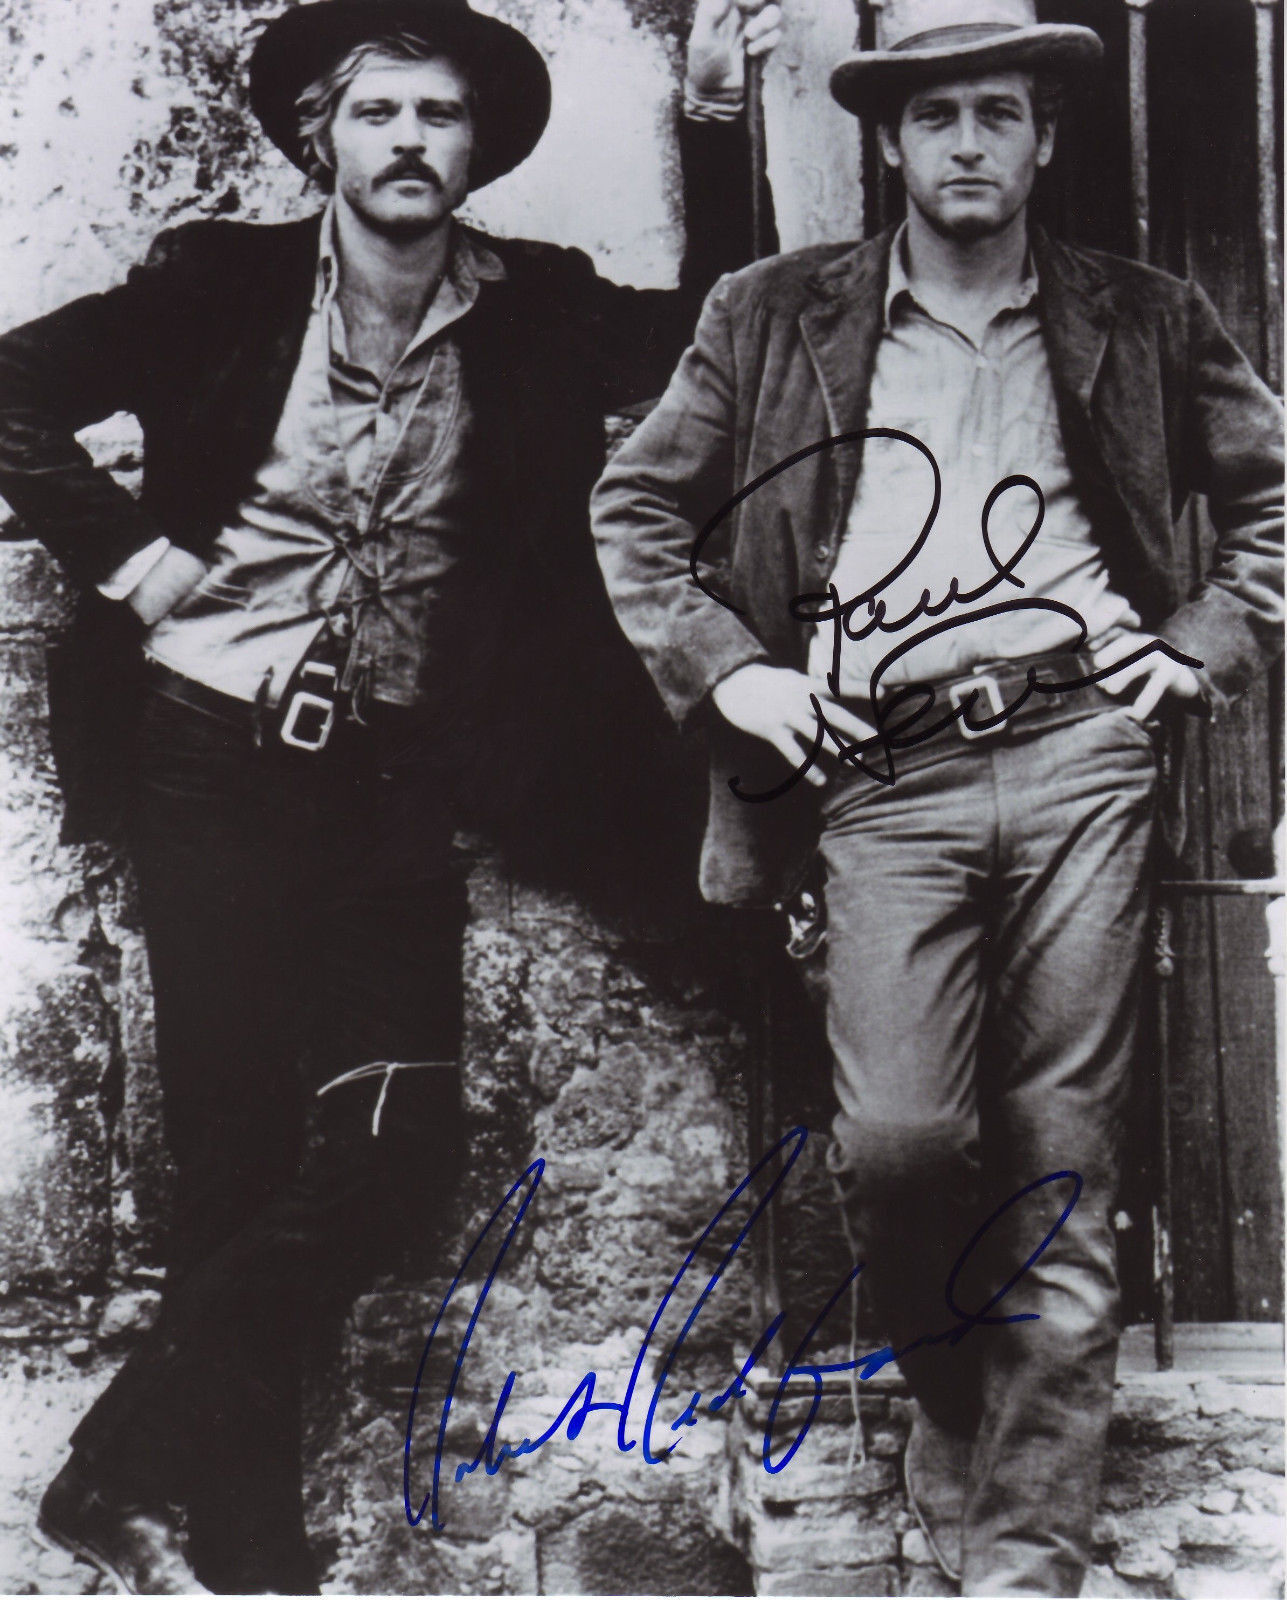 BUTCH CASSIDY - ROBERT REDFORD & PAUL NEWMAN AUTOGRAPH SIGNED PP Photo Poster painting POSTER